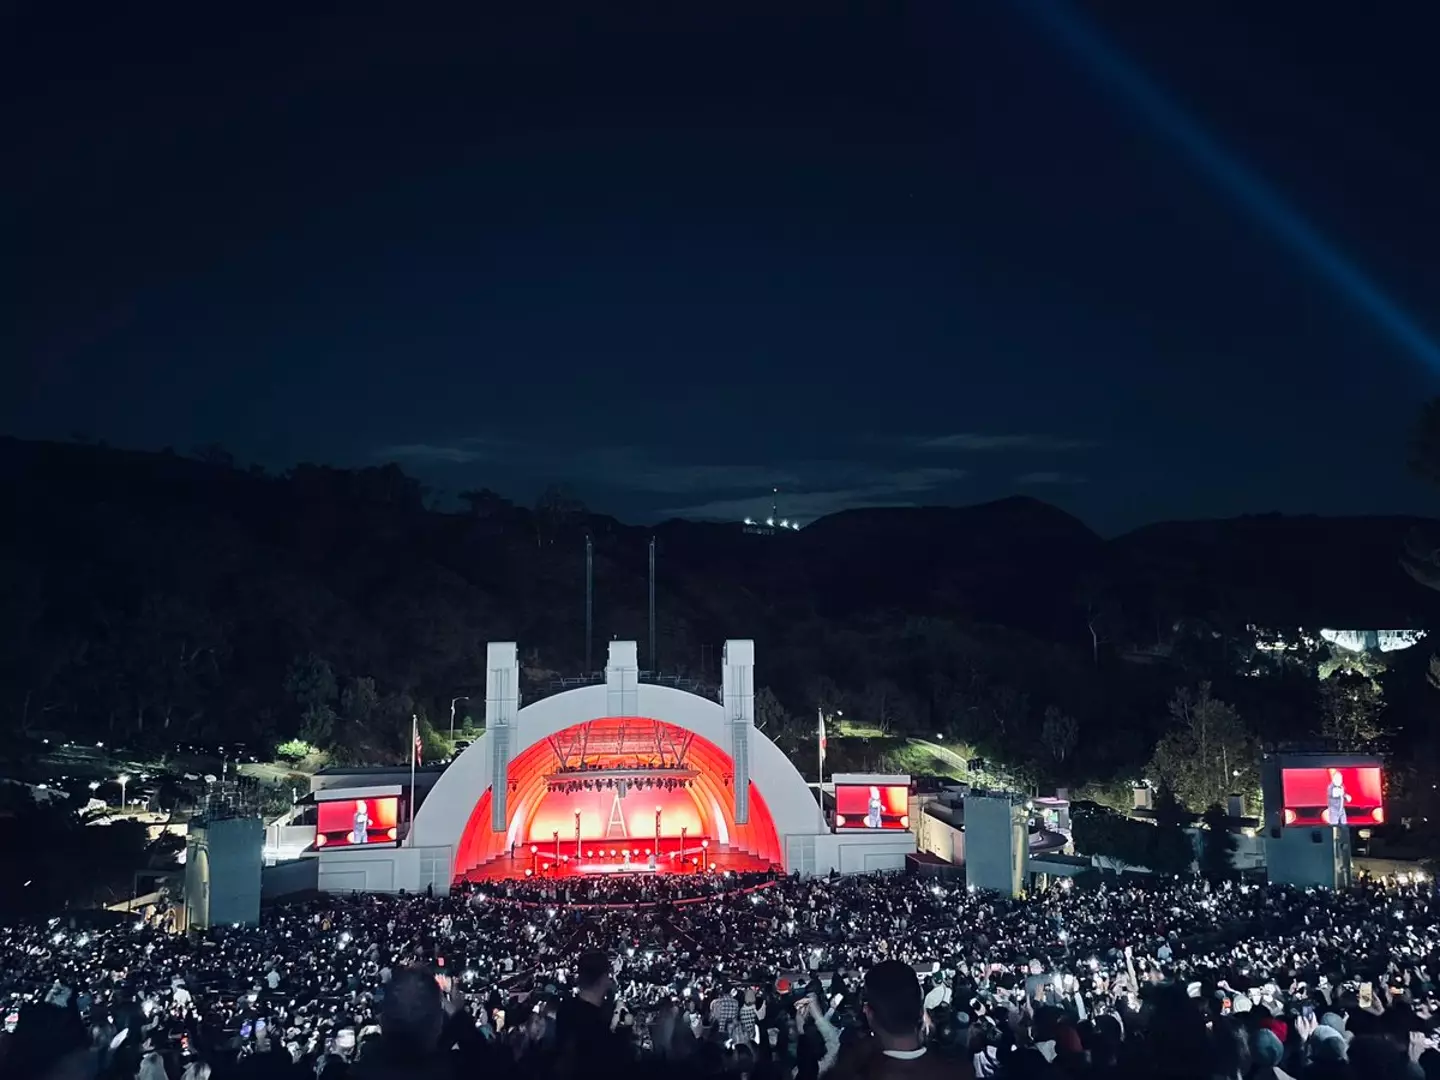 Gervais raked in over a million for the packed-out show at the Hollywood Bowl.